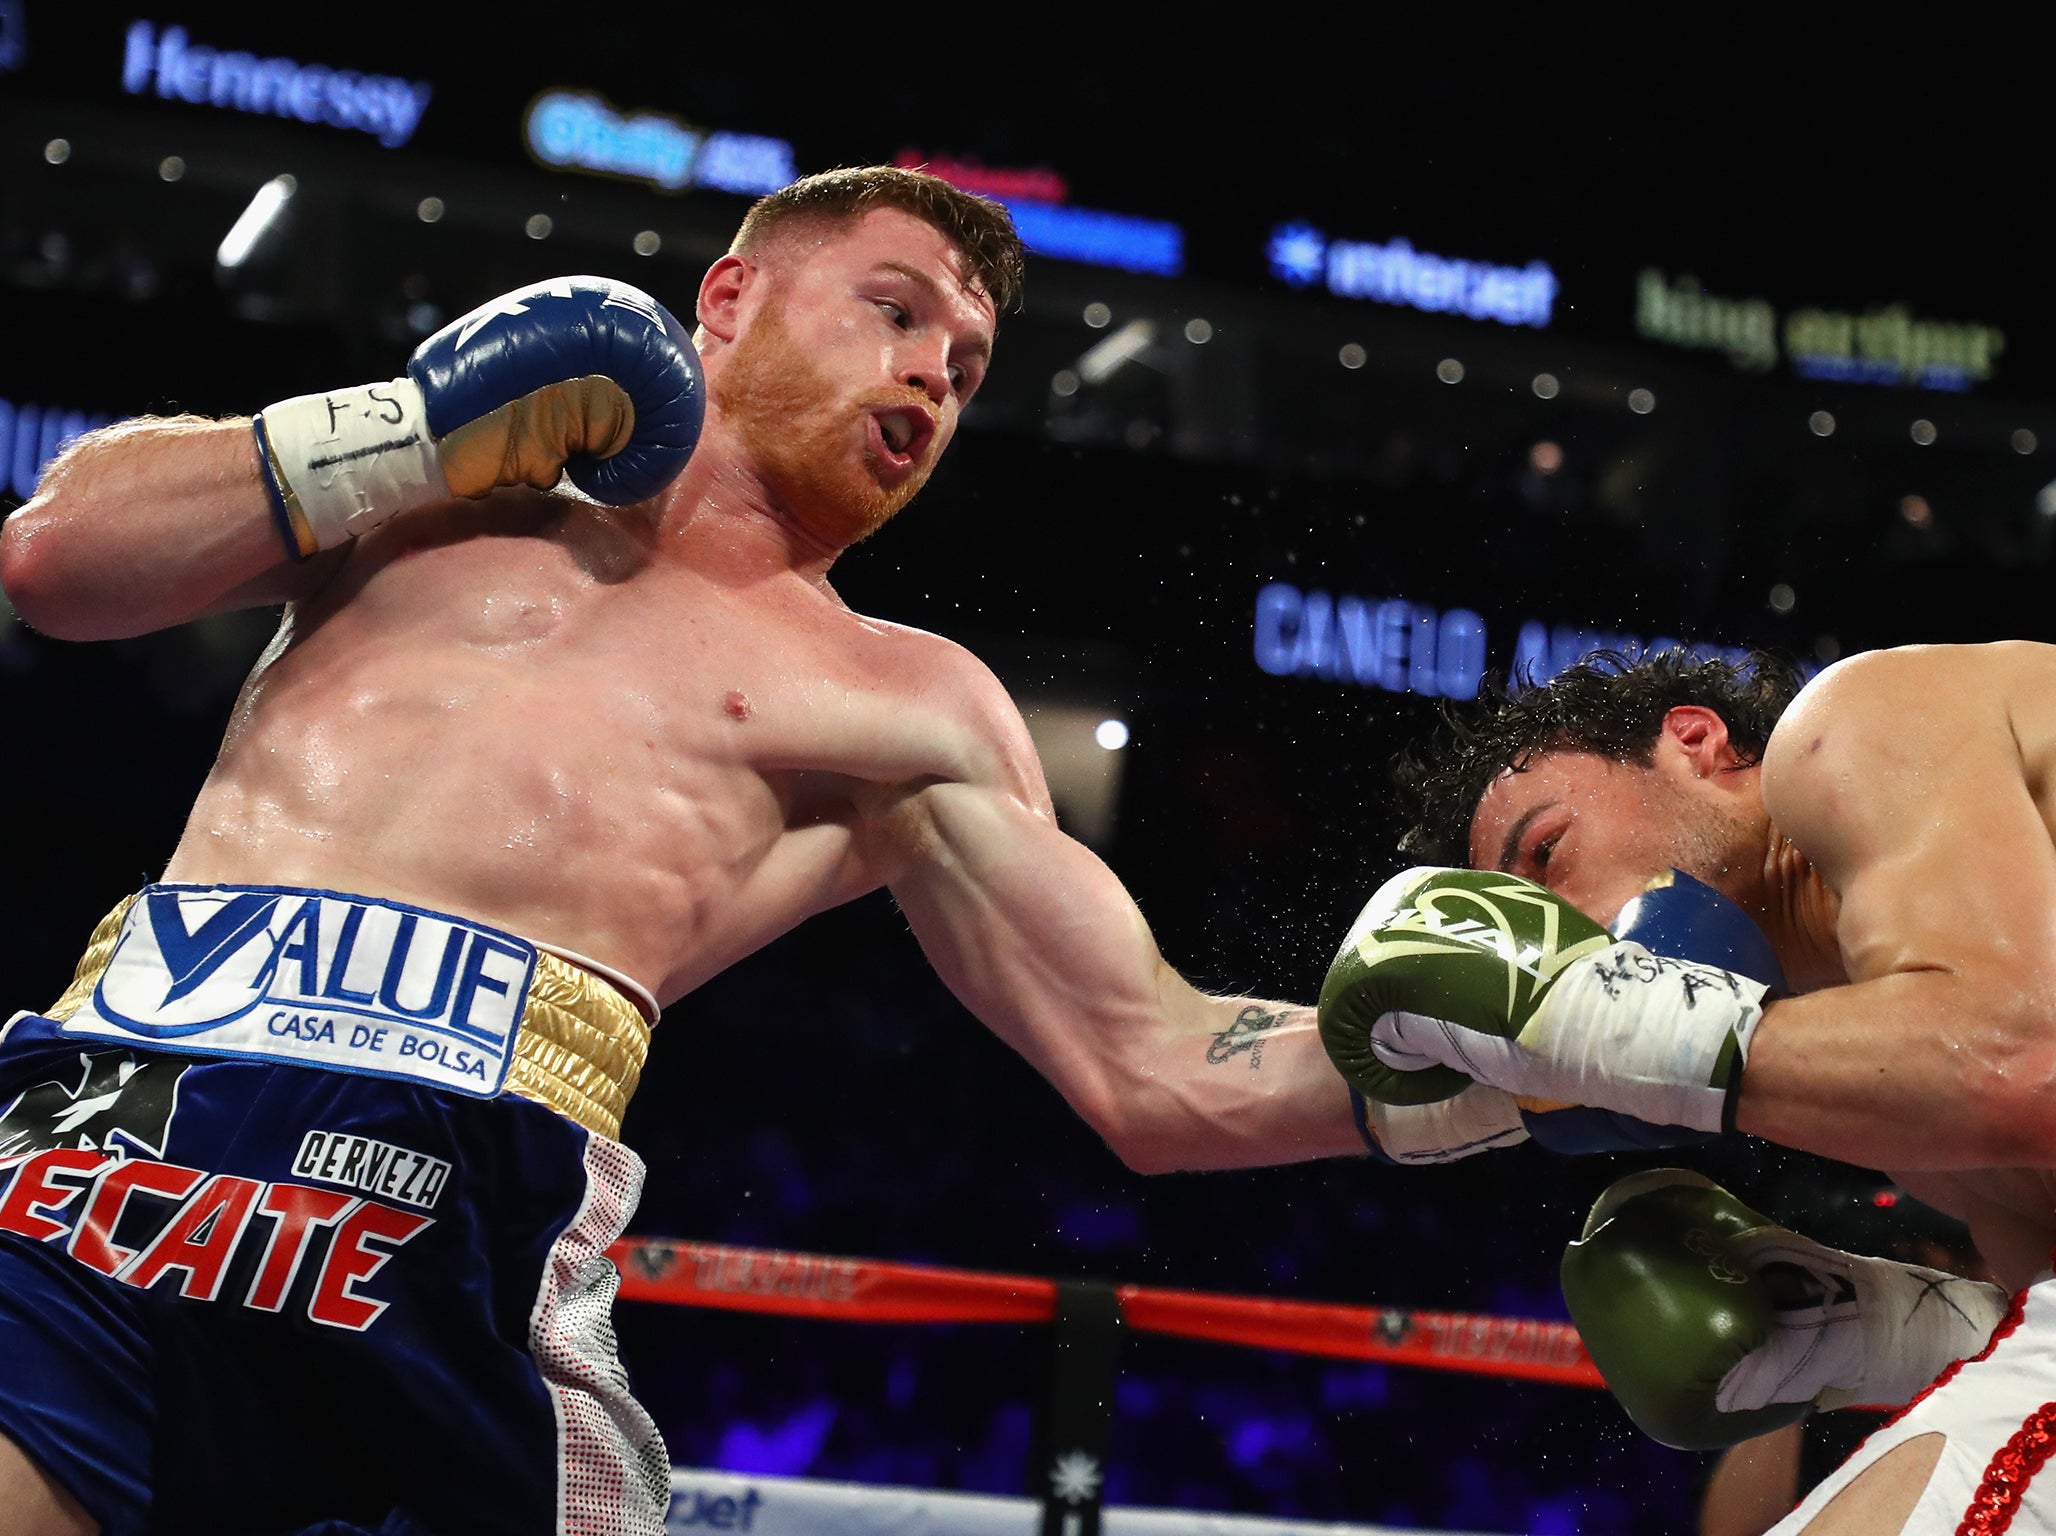 Is Canelo big enough to beat a bonafide middleweight?